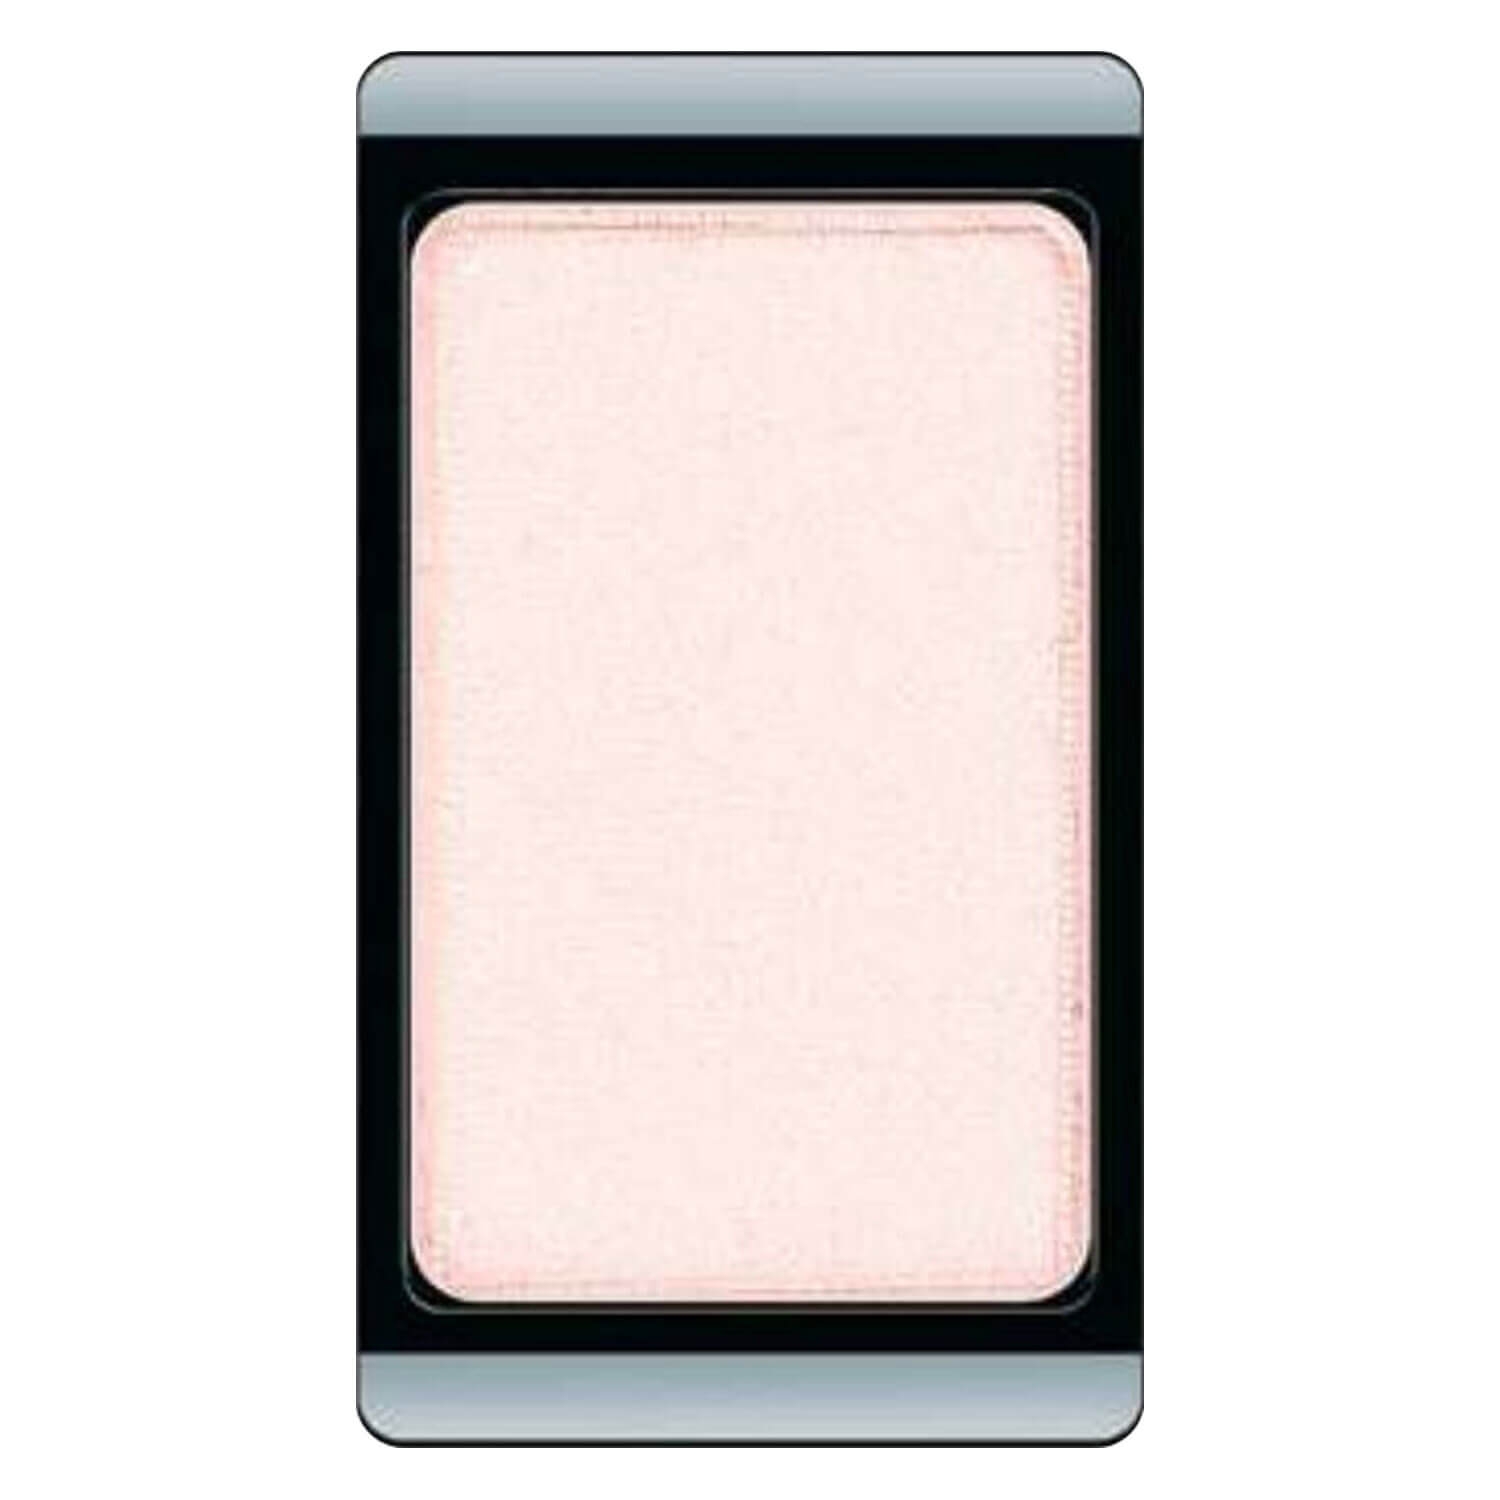 Product image from Eyeshadow Pearl - Very Light Rose 94